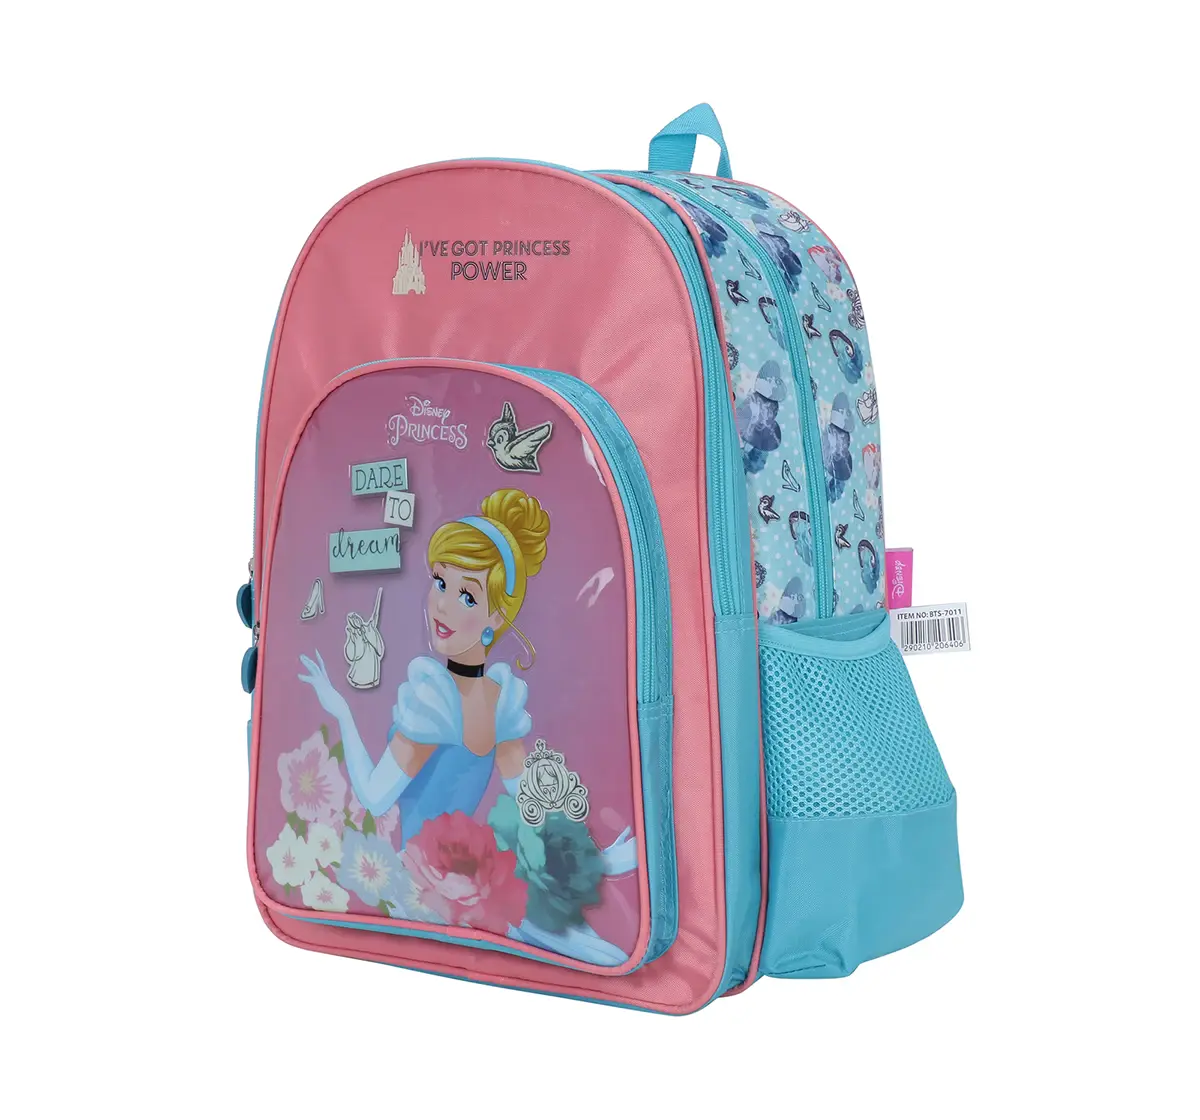 Disney Princess Dare To Dream 16" Backpack Bags for age 3Y+ 